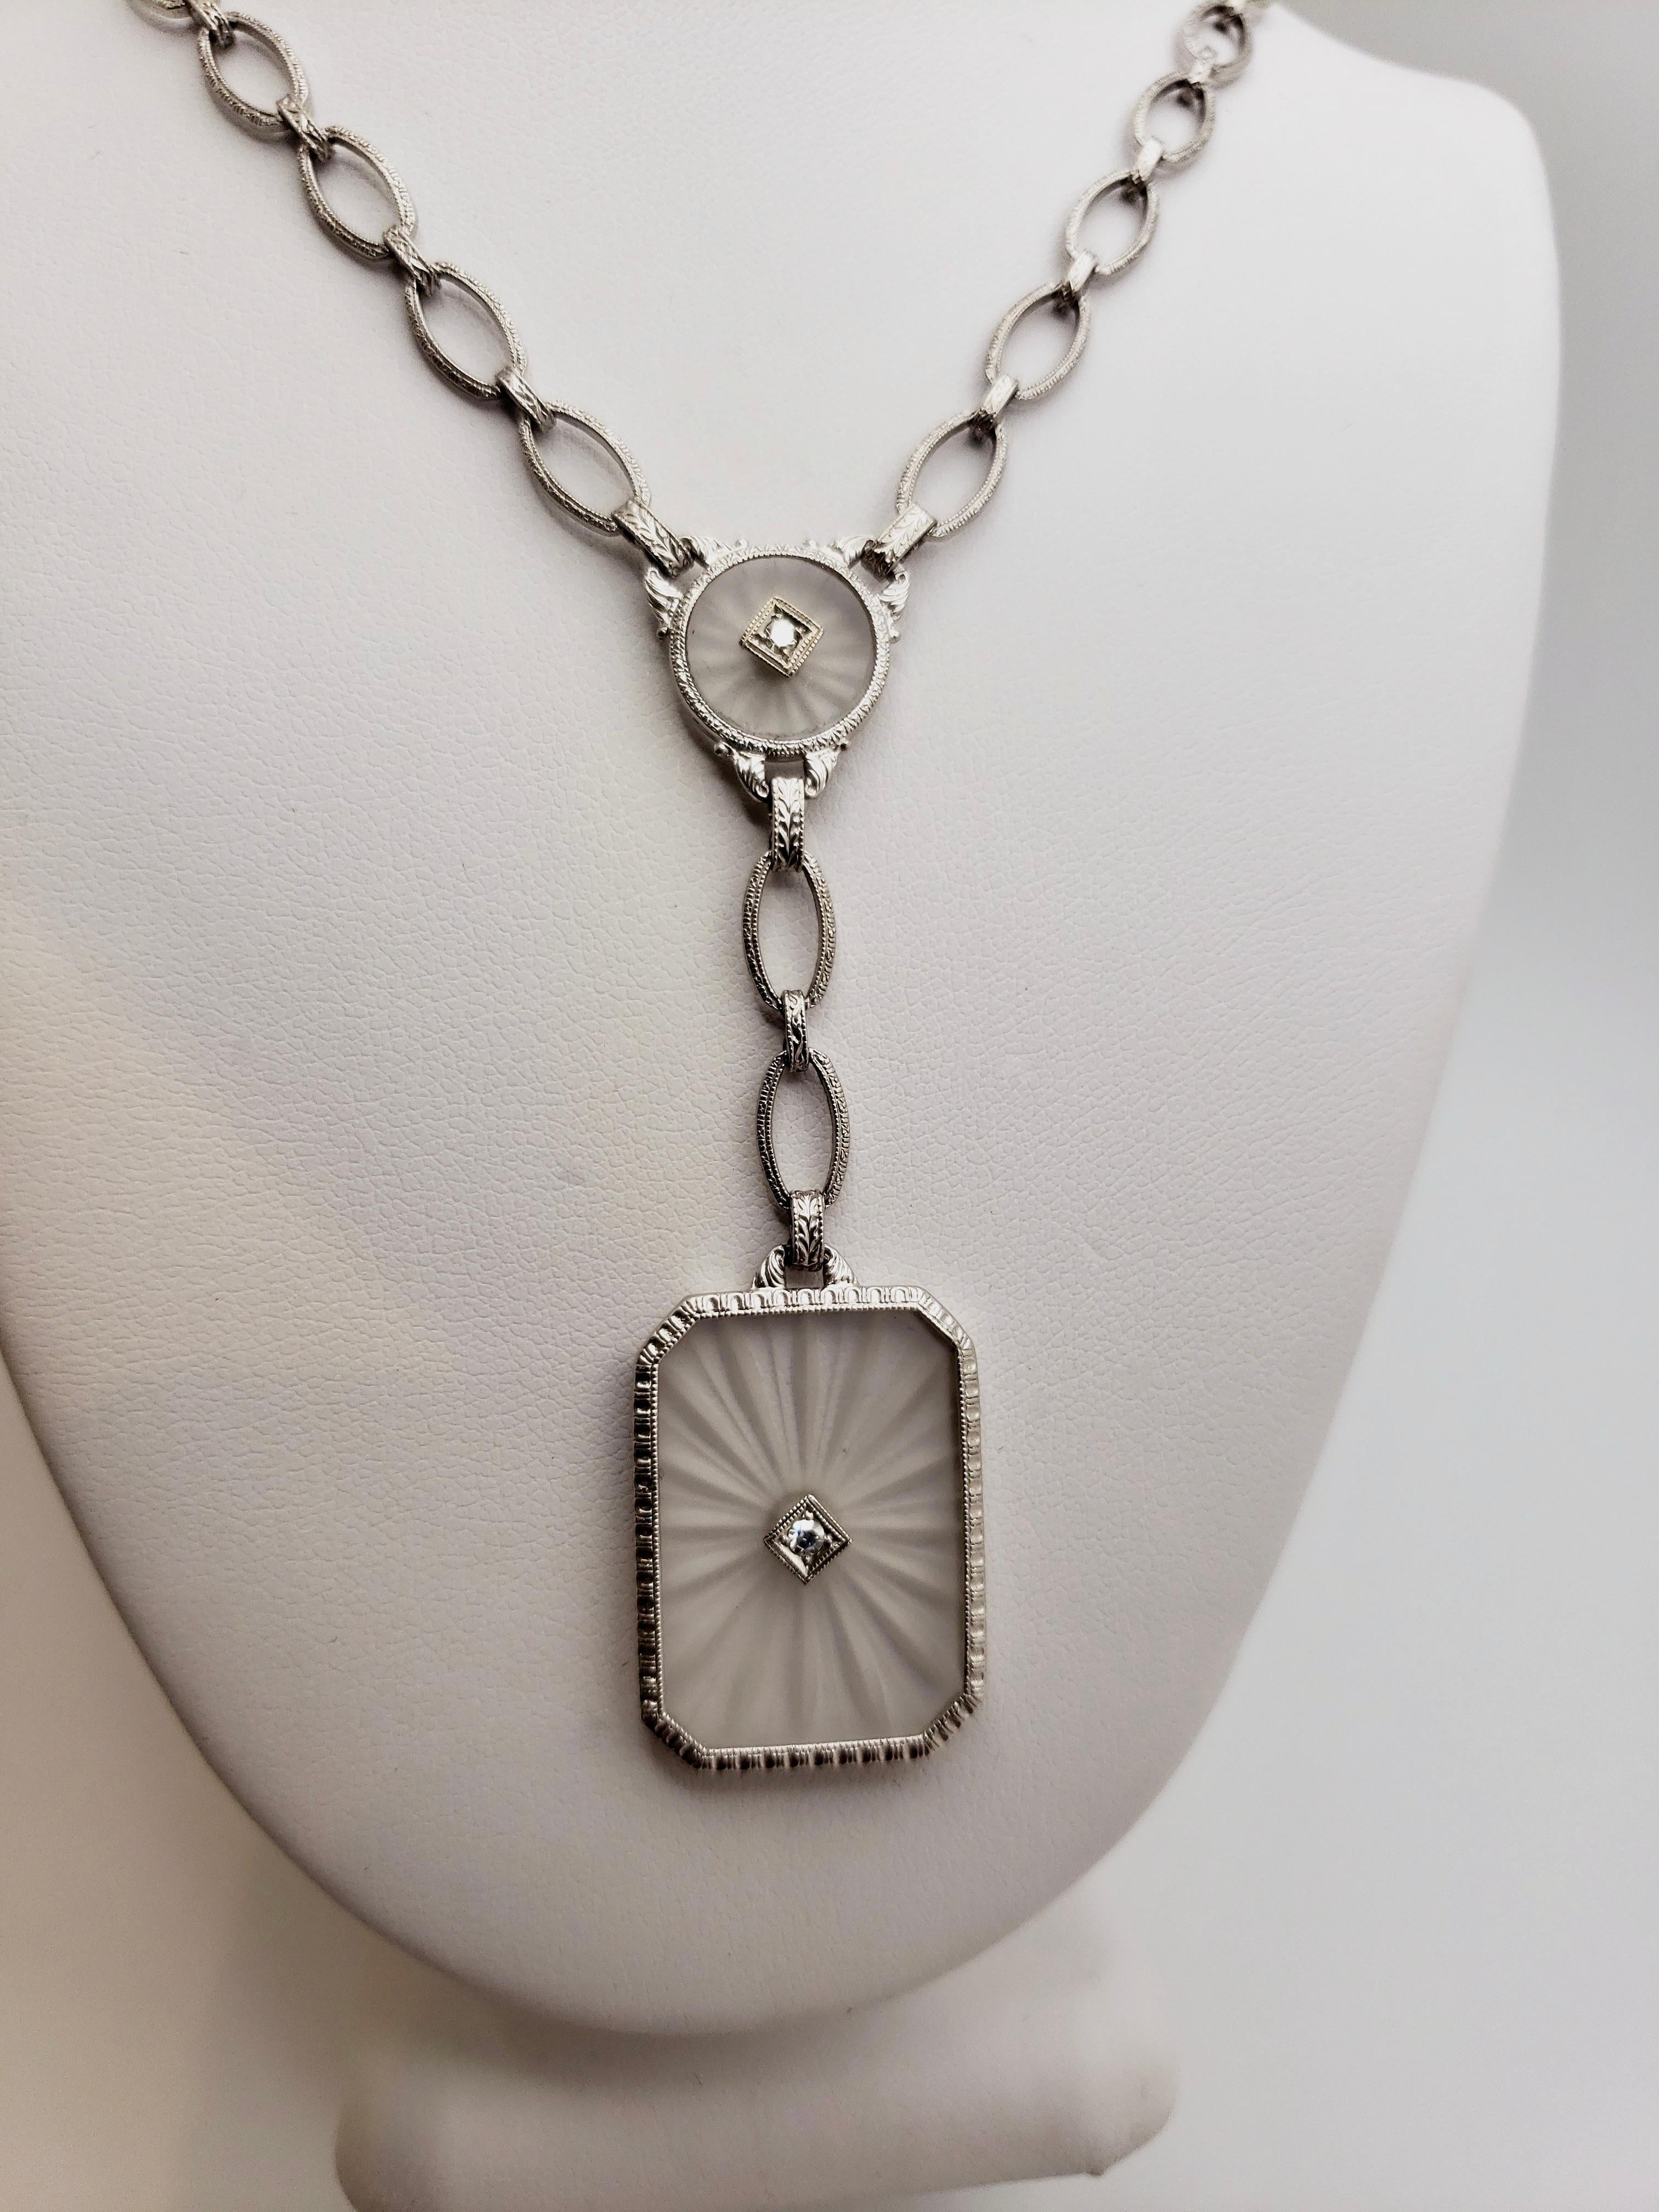 An original handmade diamond platinum and 14K white gold carved crystal necklace, circa 1950's. The beautiful link chain is accented by the engraved pattern on each link. A circular carved sun-ray crystal accented by diamonds bonds the chain, with